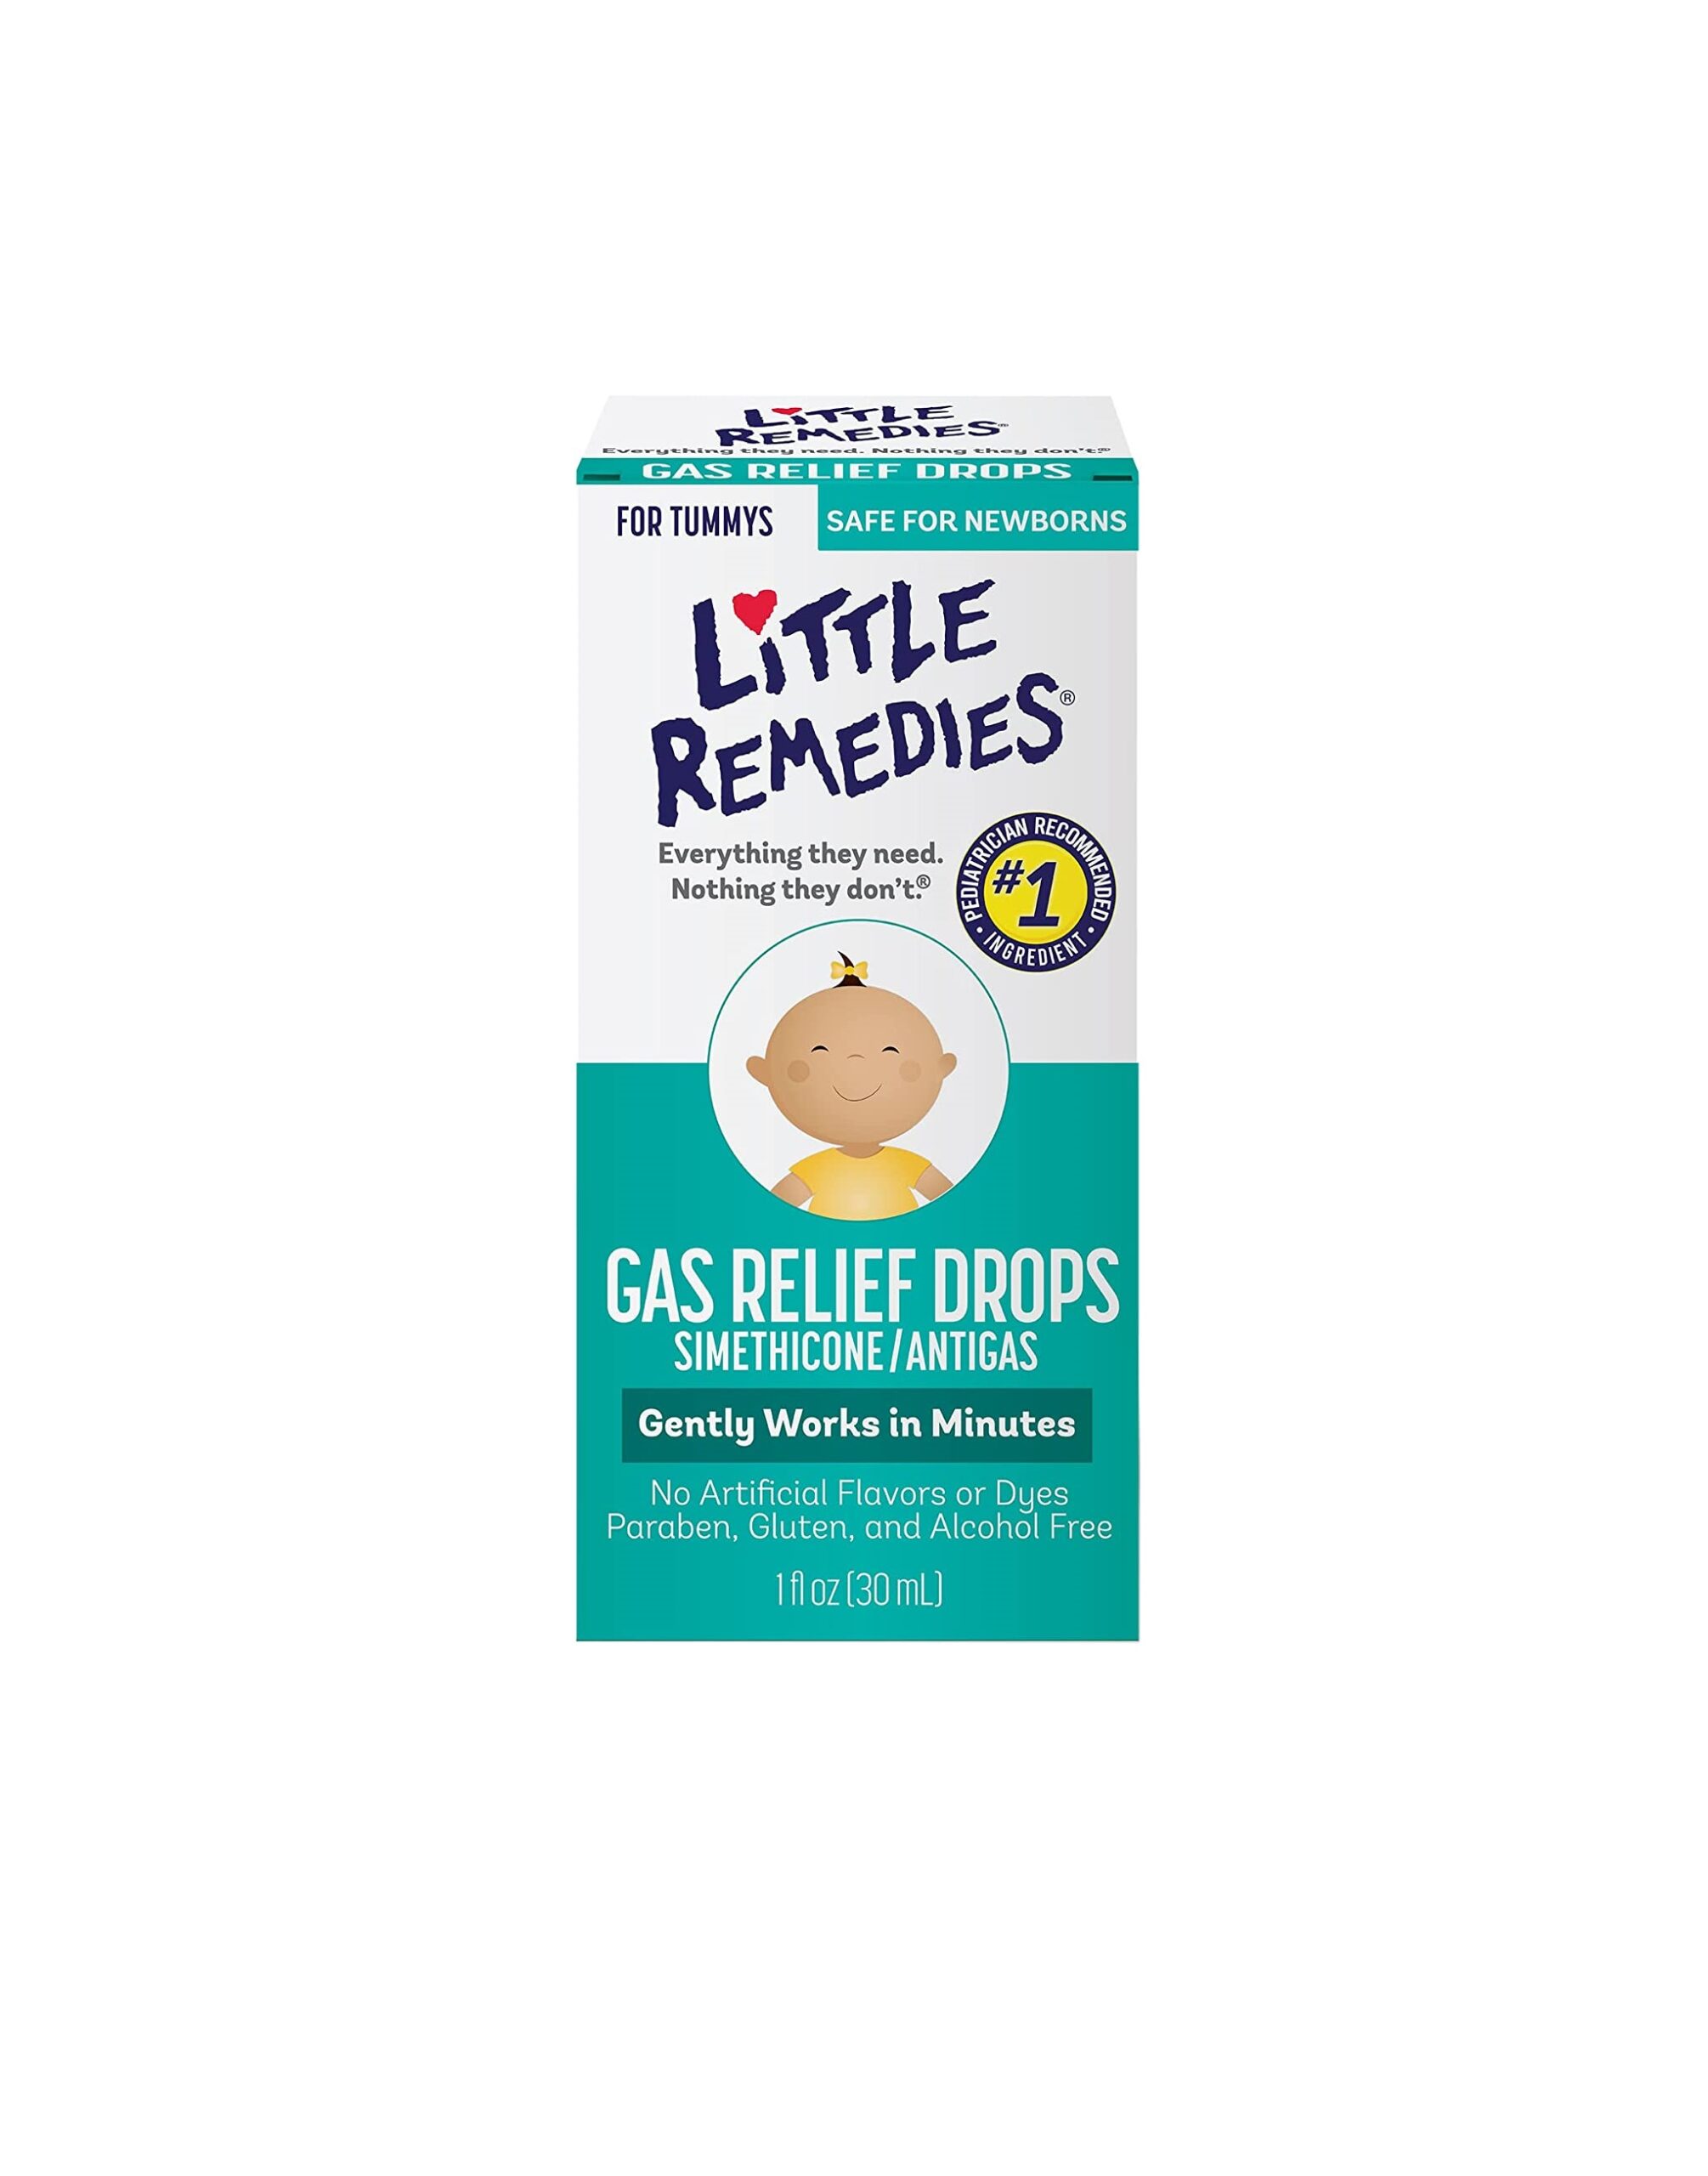 Little Remedies Gas Relief Drops for Tummy's